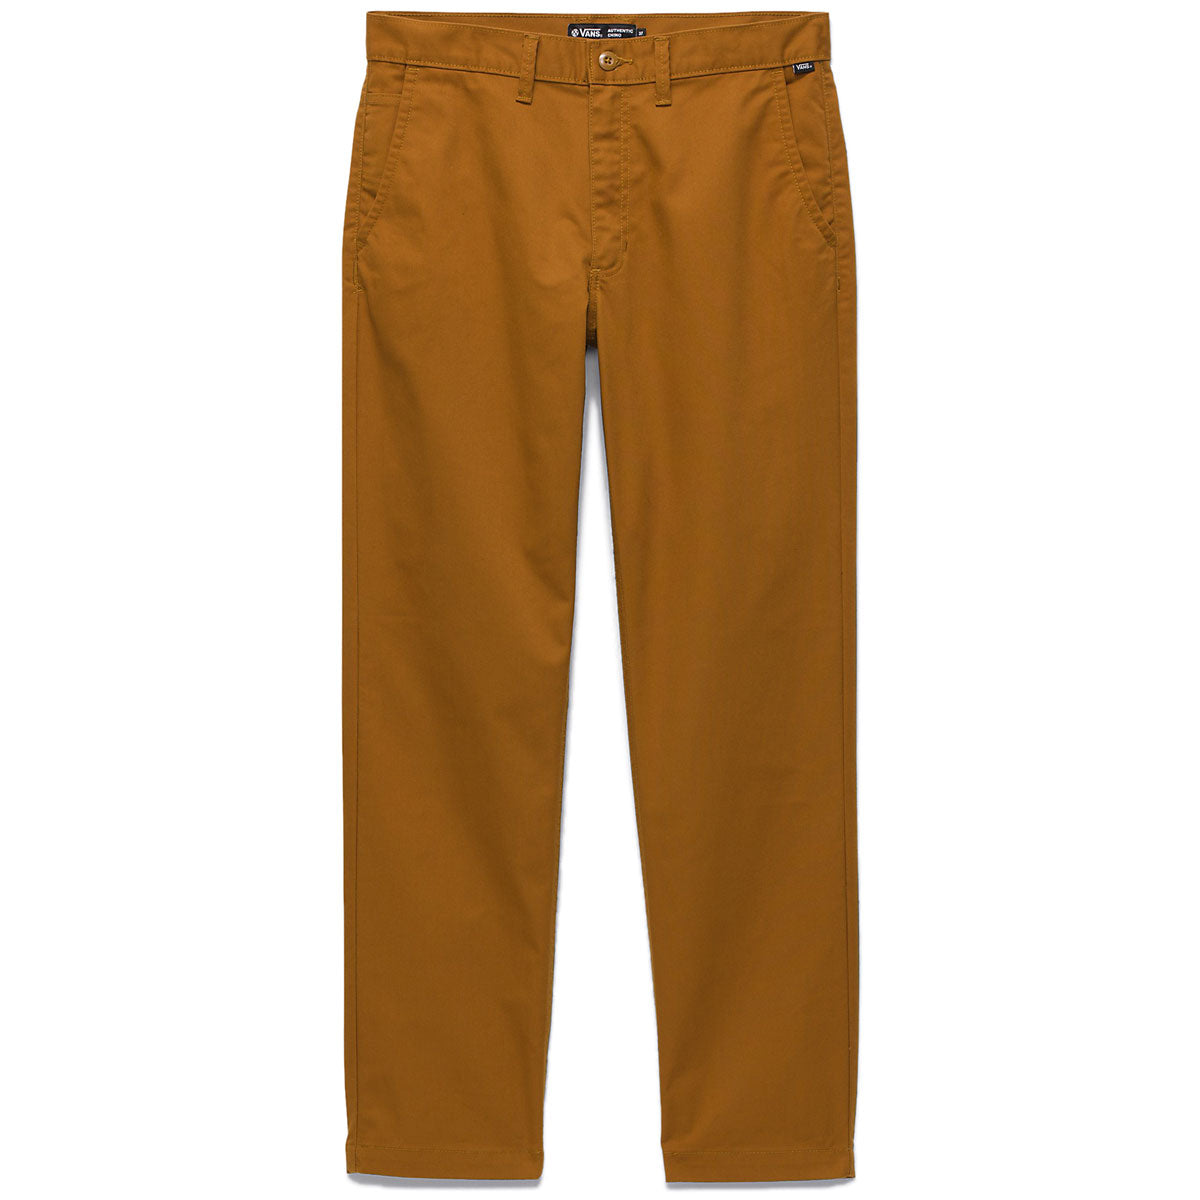 Vans Authentic Chino Relaxed Pants - Fatal Floral Golden Brown